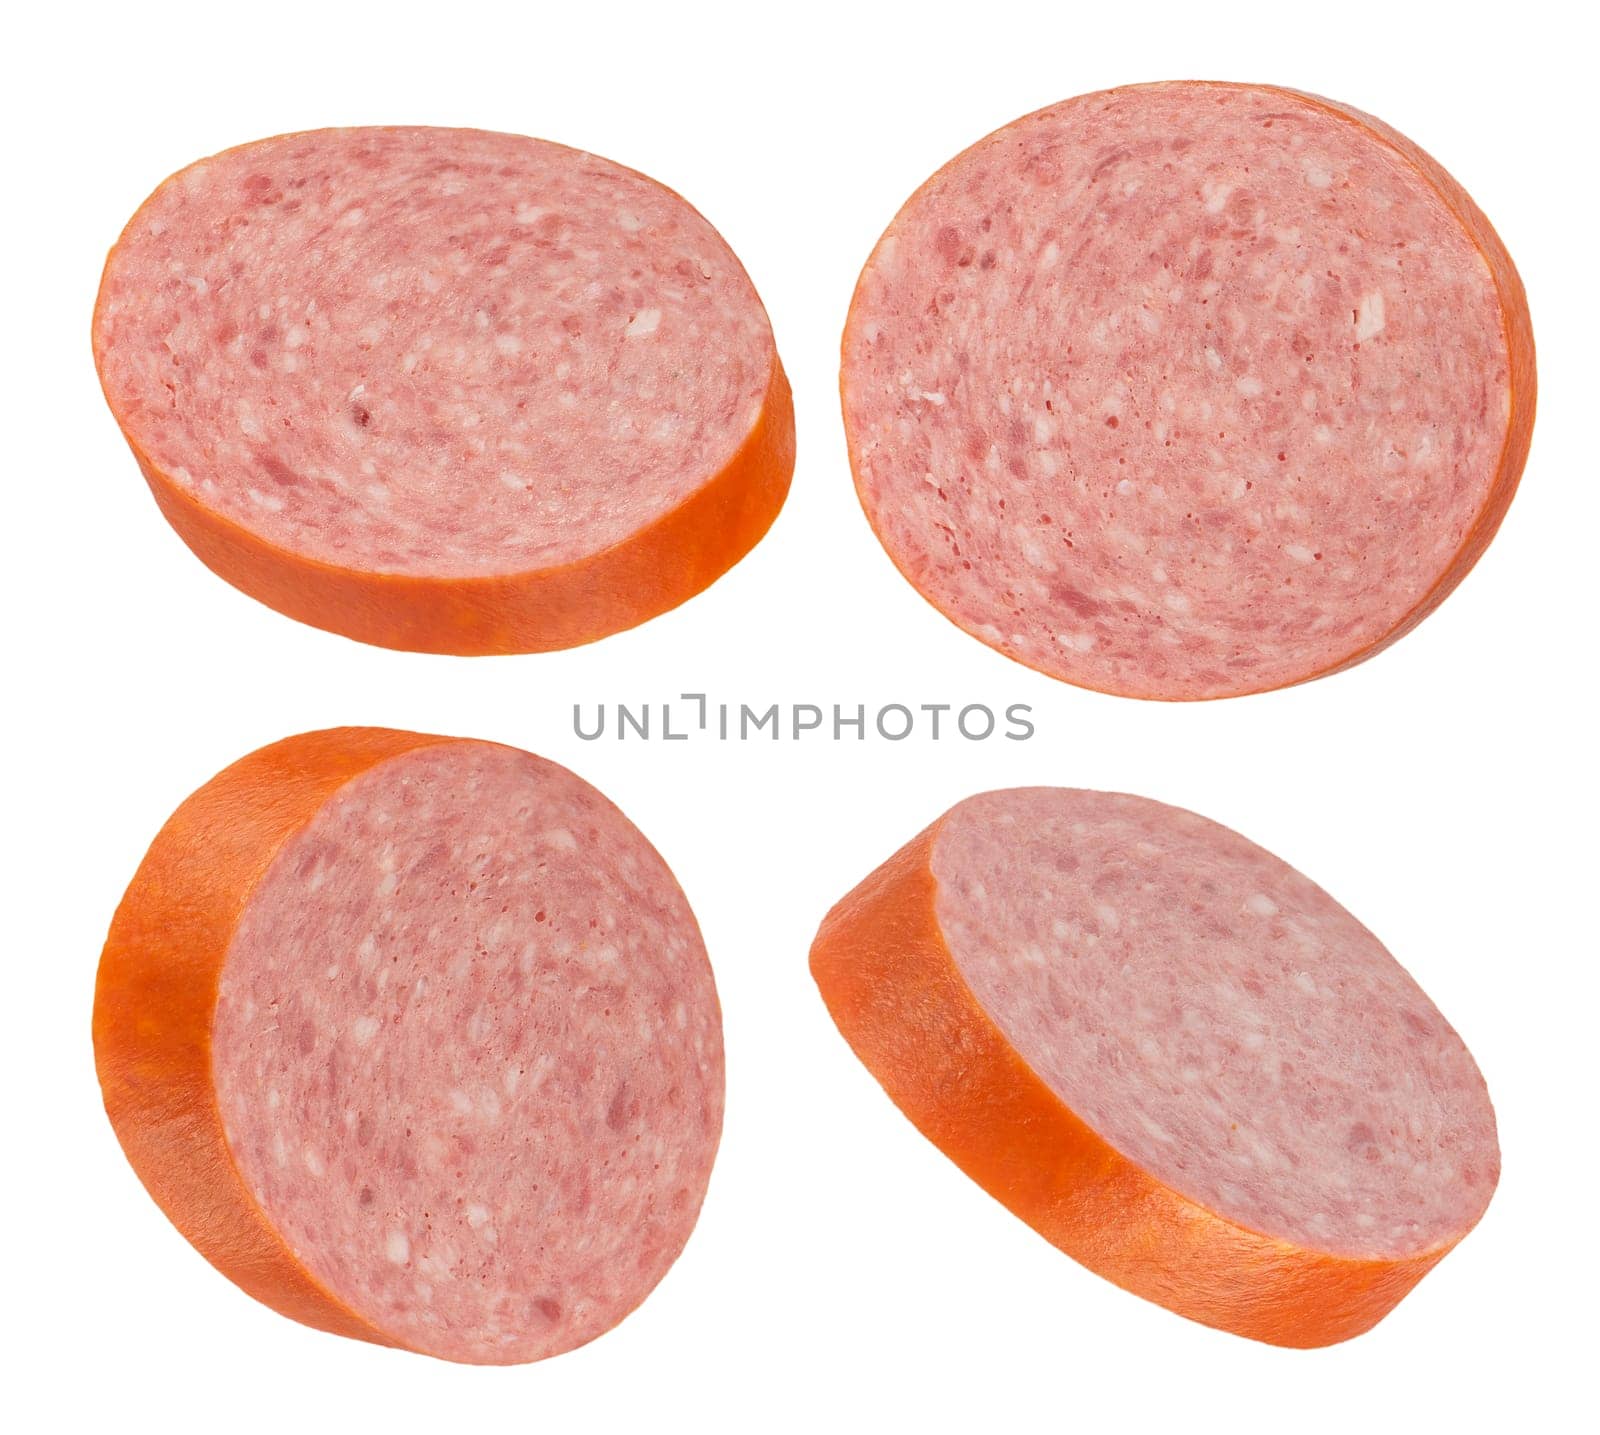 Salami sausage slices on a white isolated background. Salami slices from different sides. For inserting into a design, project, or for product packaging. by SERSOL